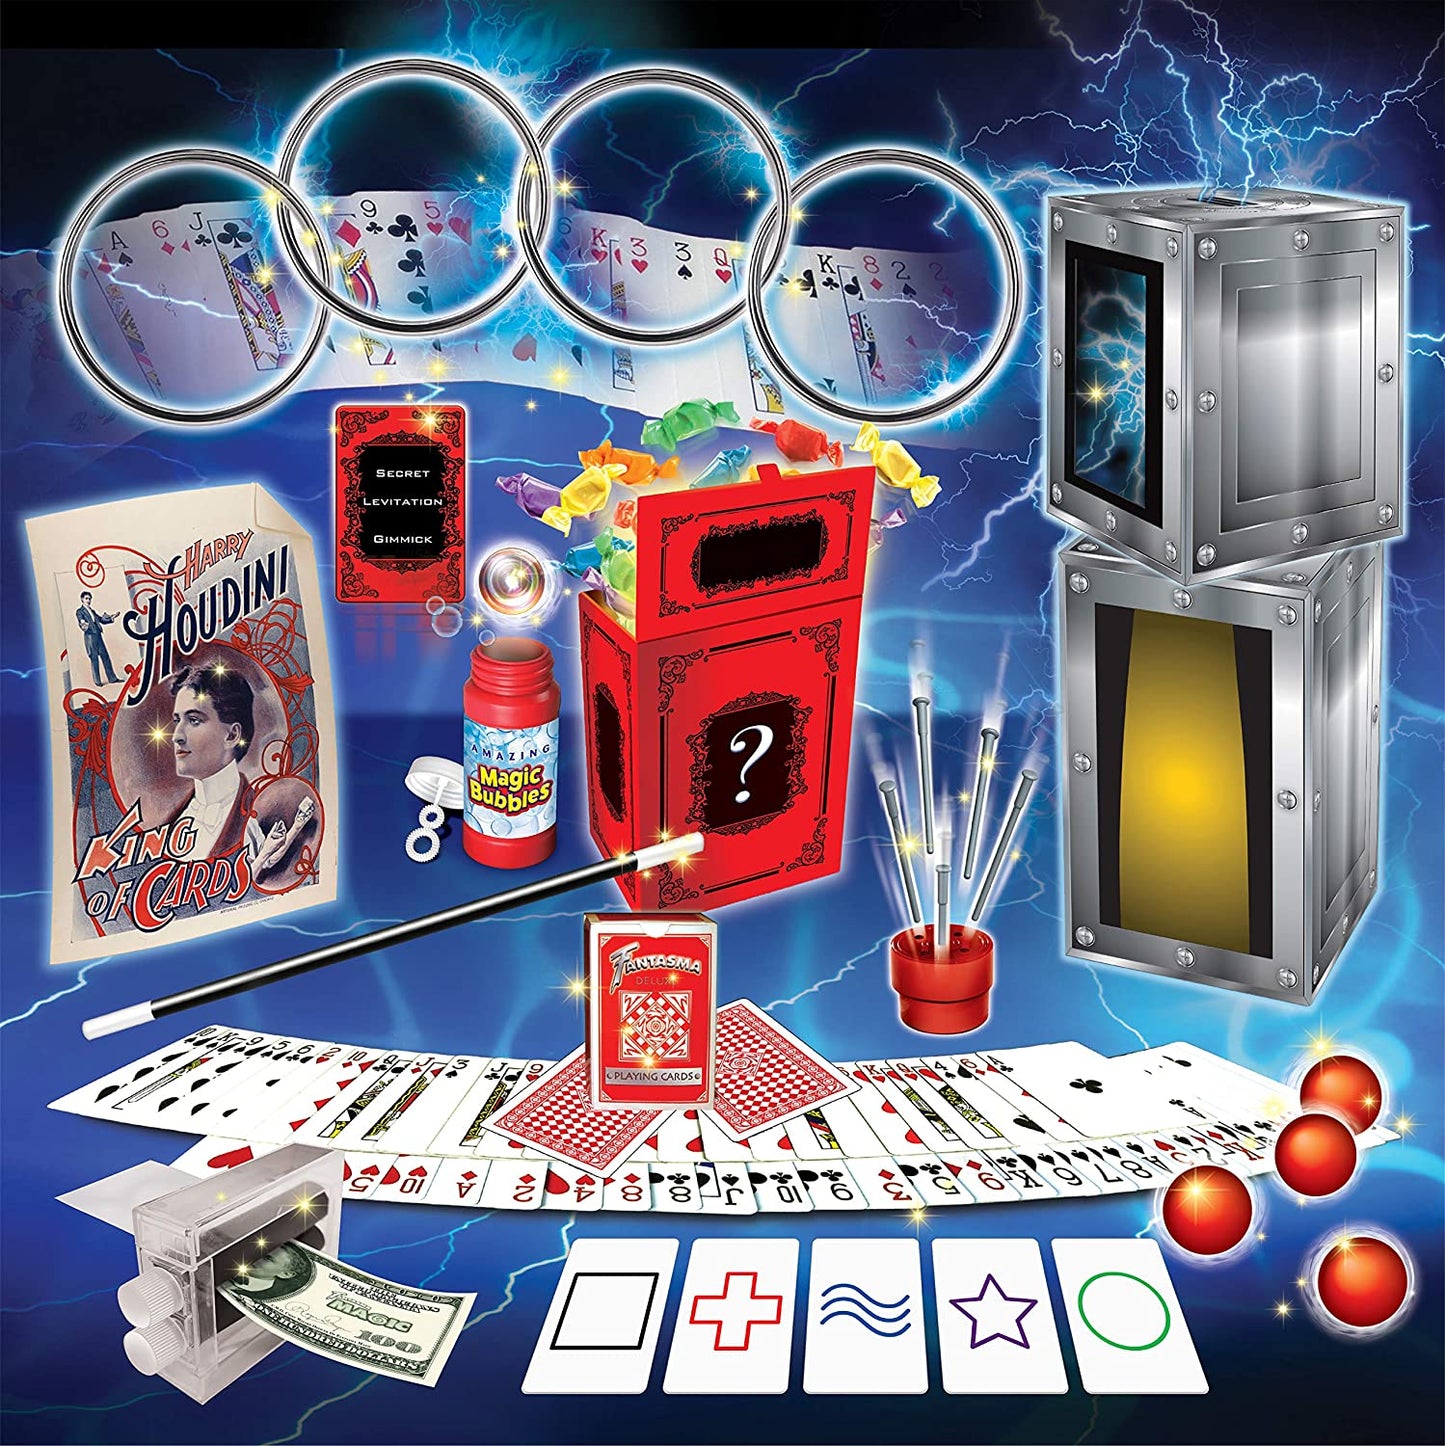 Fantasma Deluxe Grand Illusions Magic Set with 200+ Tricks to Learn (78EUD) – Great Value Magic Kit